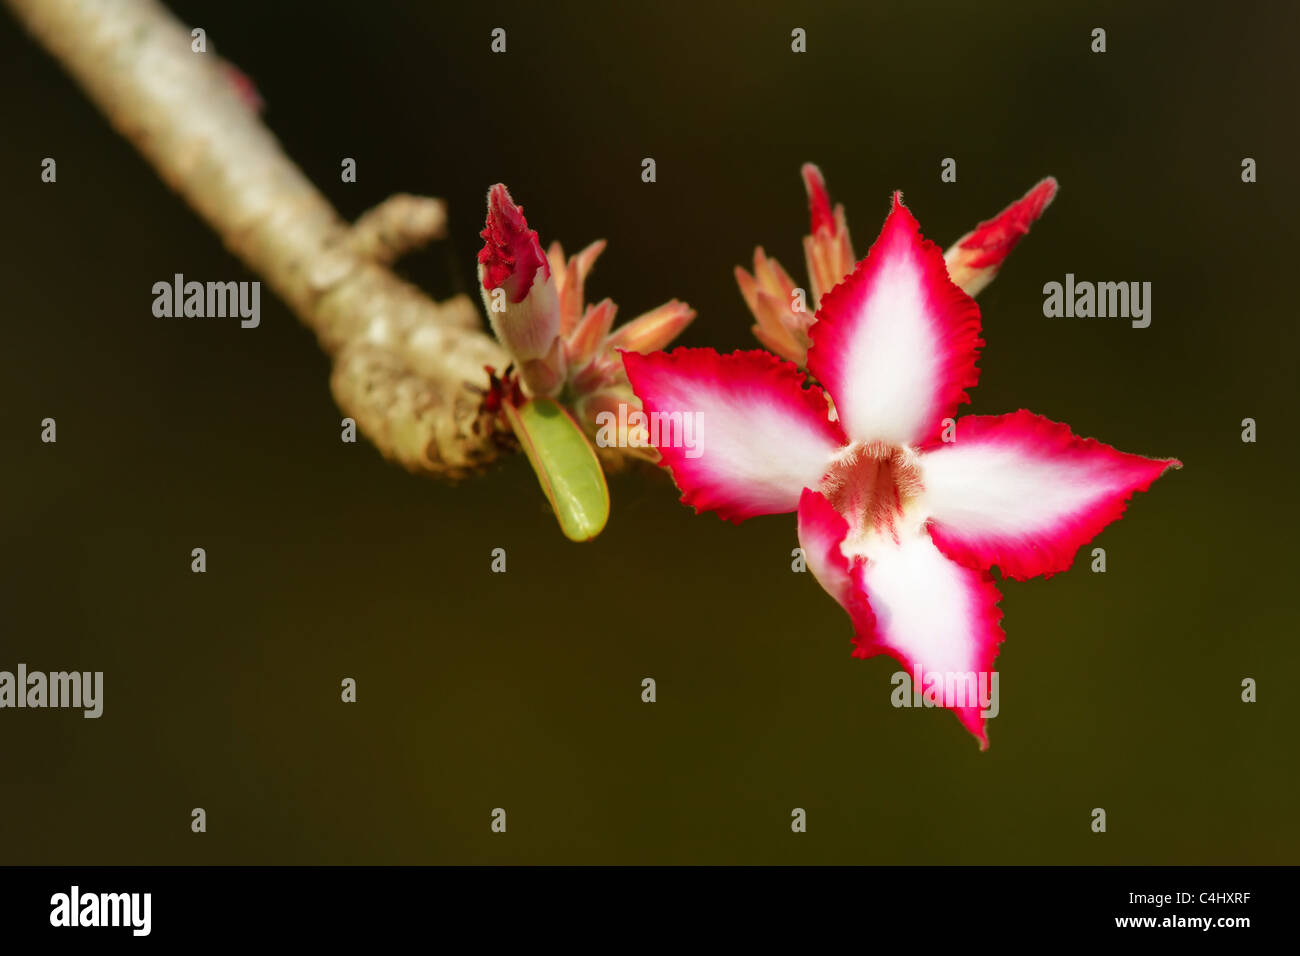 Impala Lily flower (Adenium multiflorum) in the Kruger National Park - South Africa Stock Photo